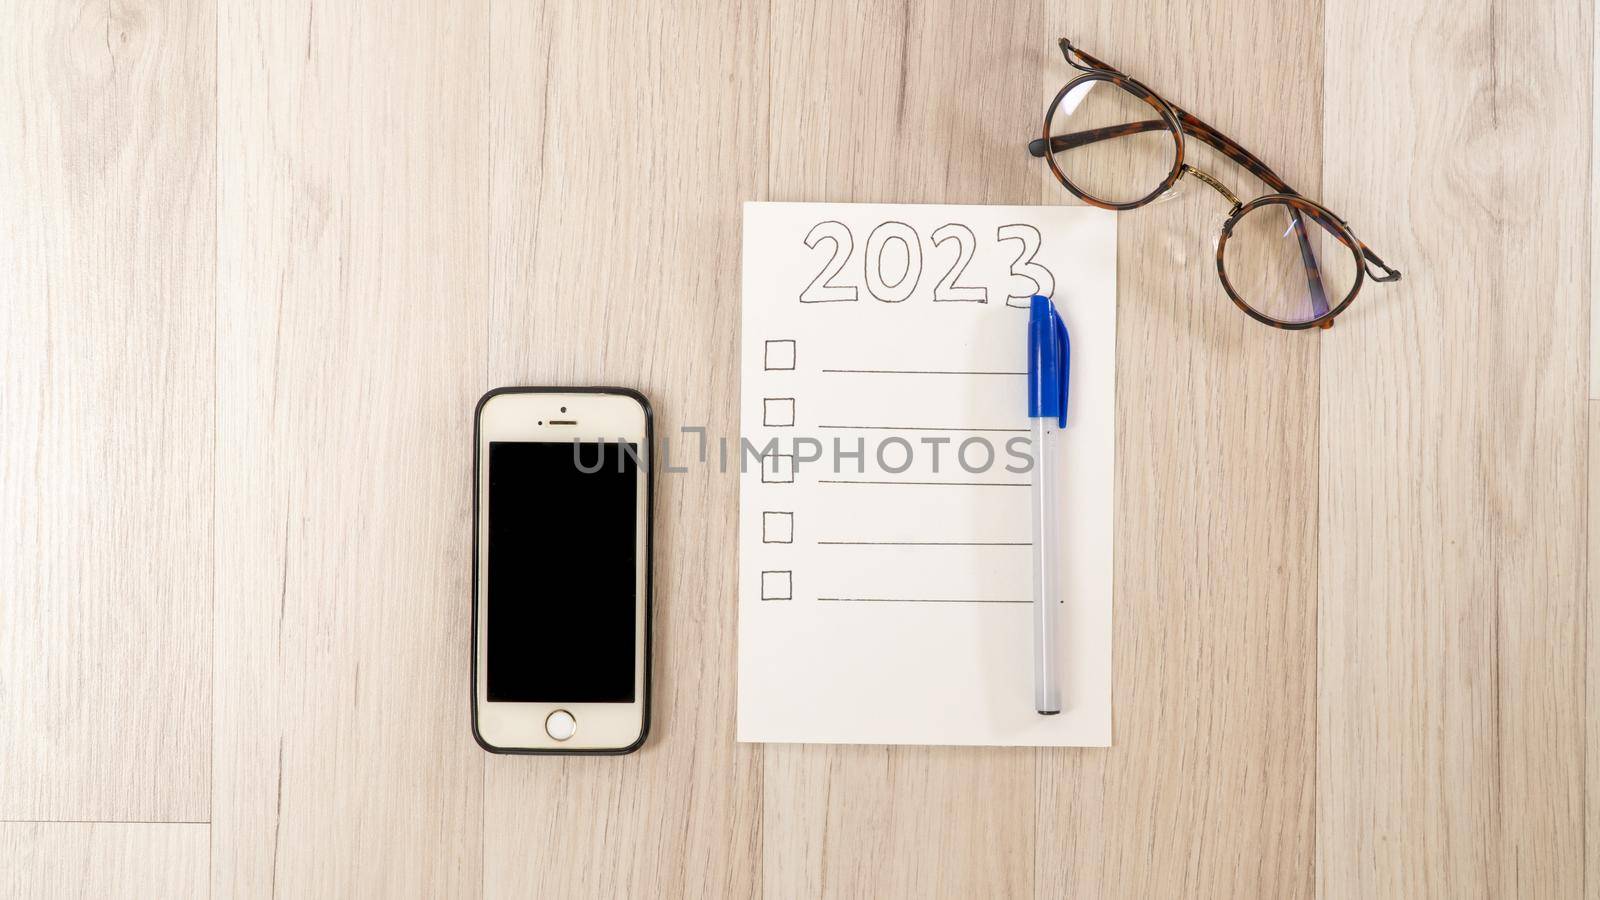 Checklist for 2023, smartphone and glasses on a wooden table, to-do list for the new year. High quality photo